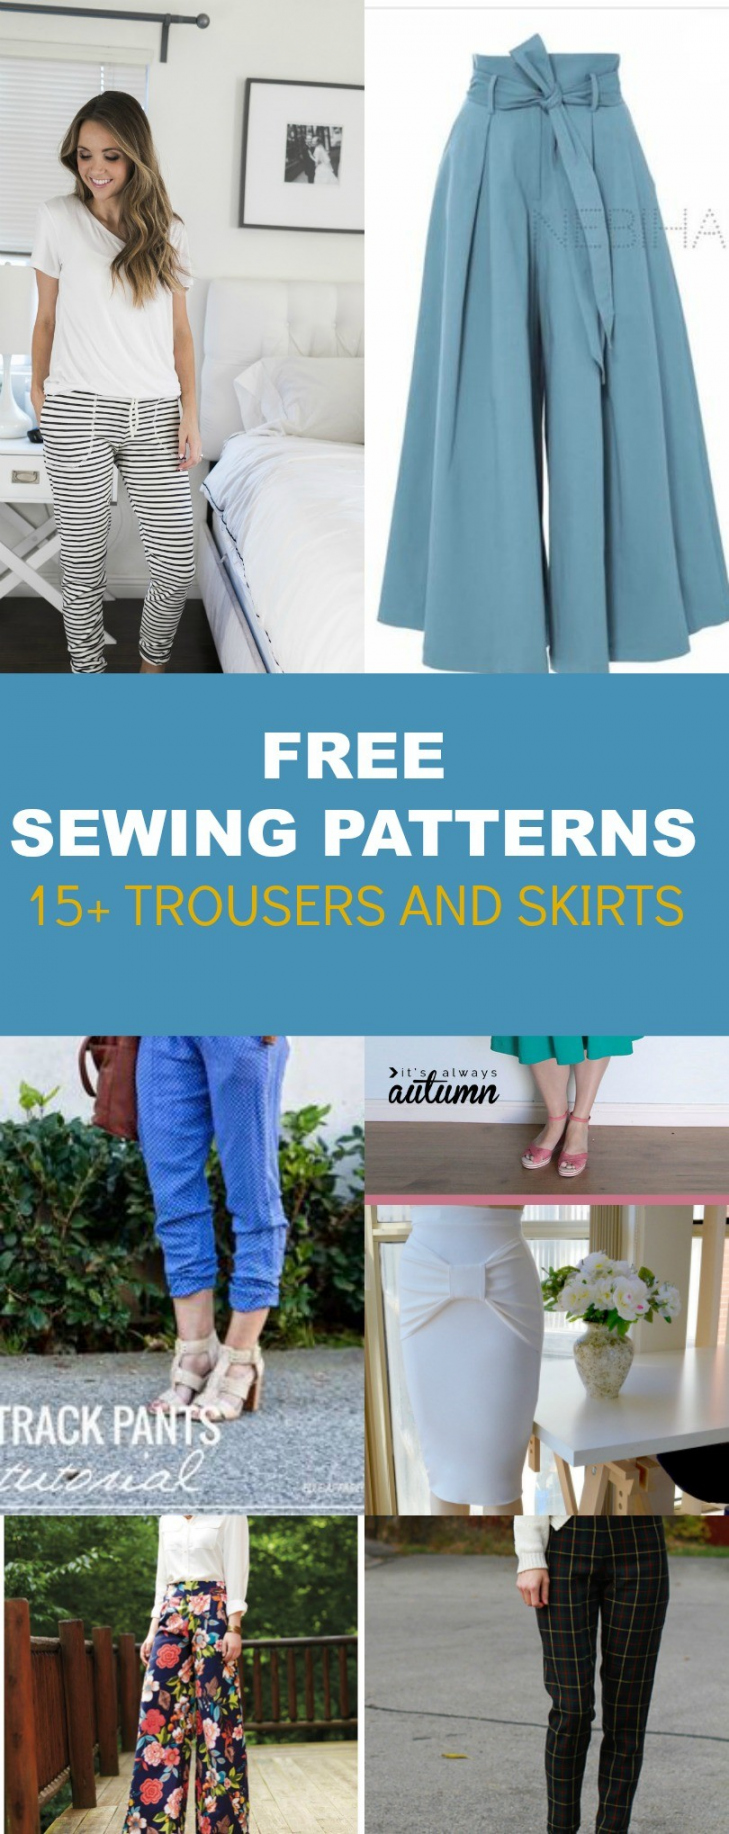 FREE PATTERN ALERT: + Pants and Skirts Sewing Tutorials  On the  - FREE Printables - Free Printable Sewing Patterns Pants